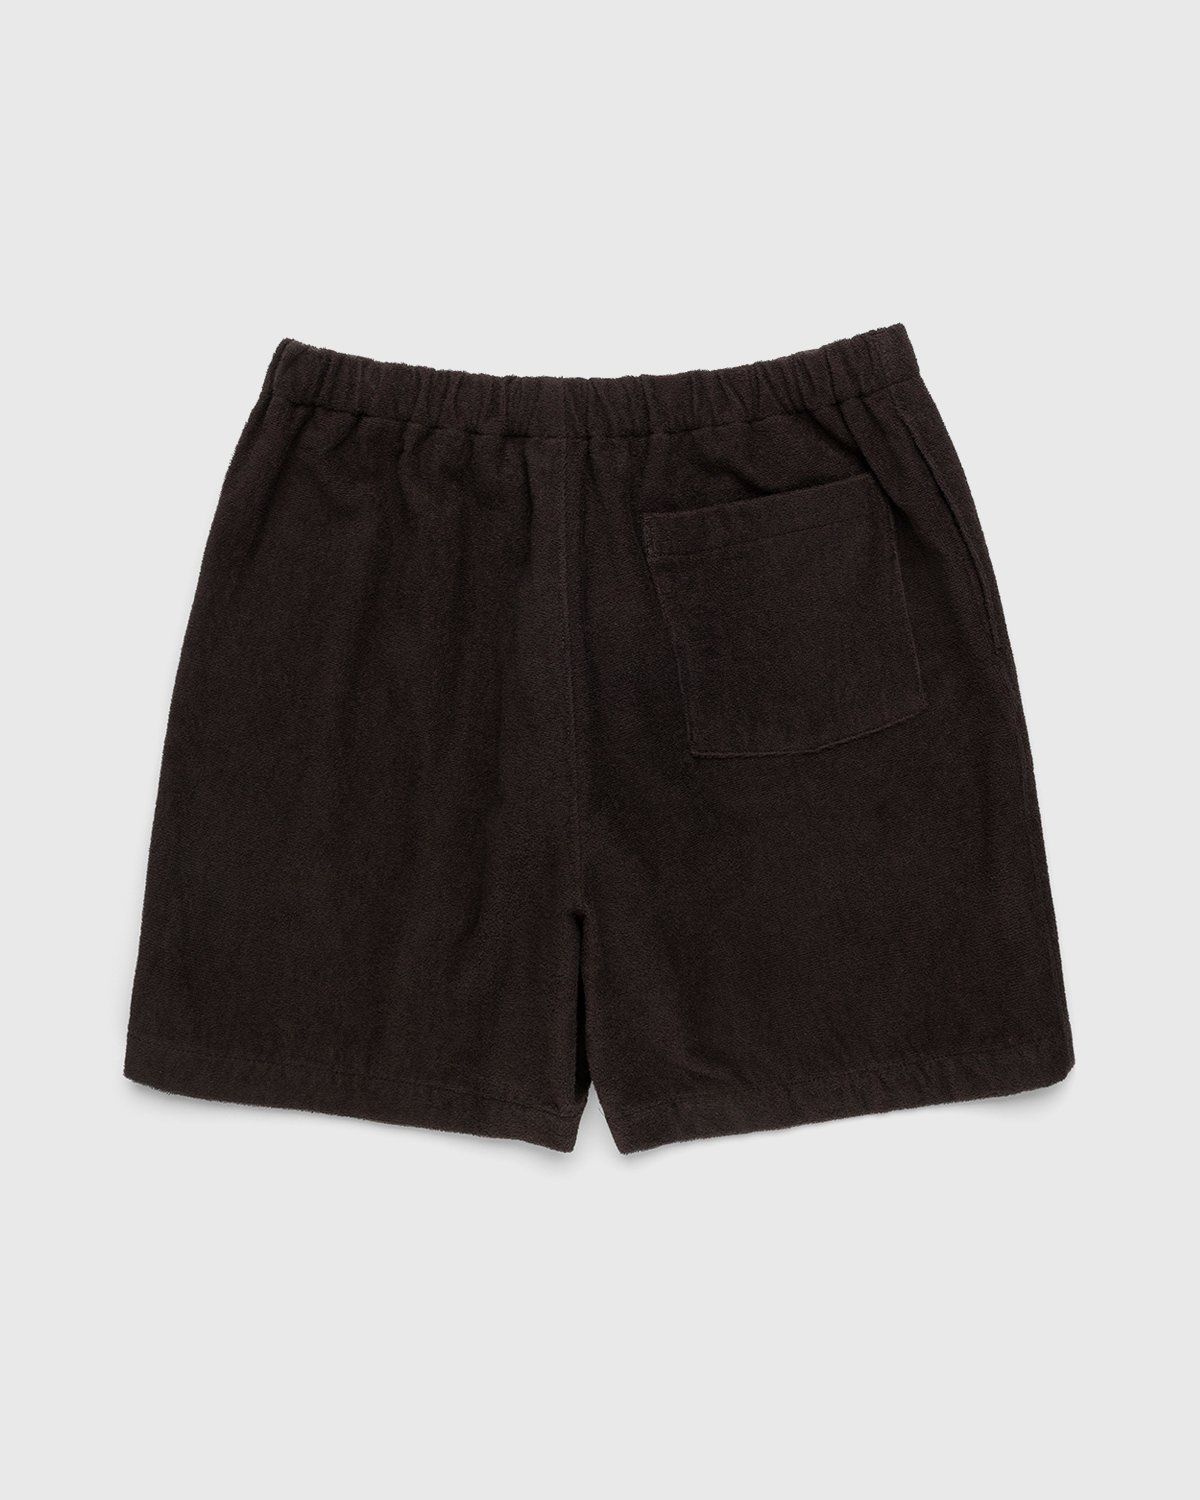 Auralee – Cotton Terry Cloth Shorts Brown - Short Cuts - Brown - Image 2